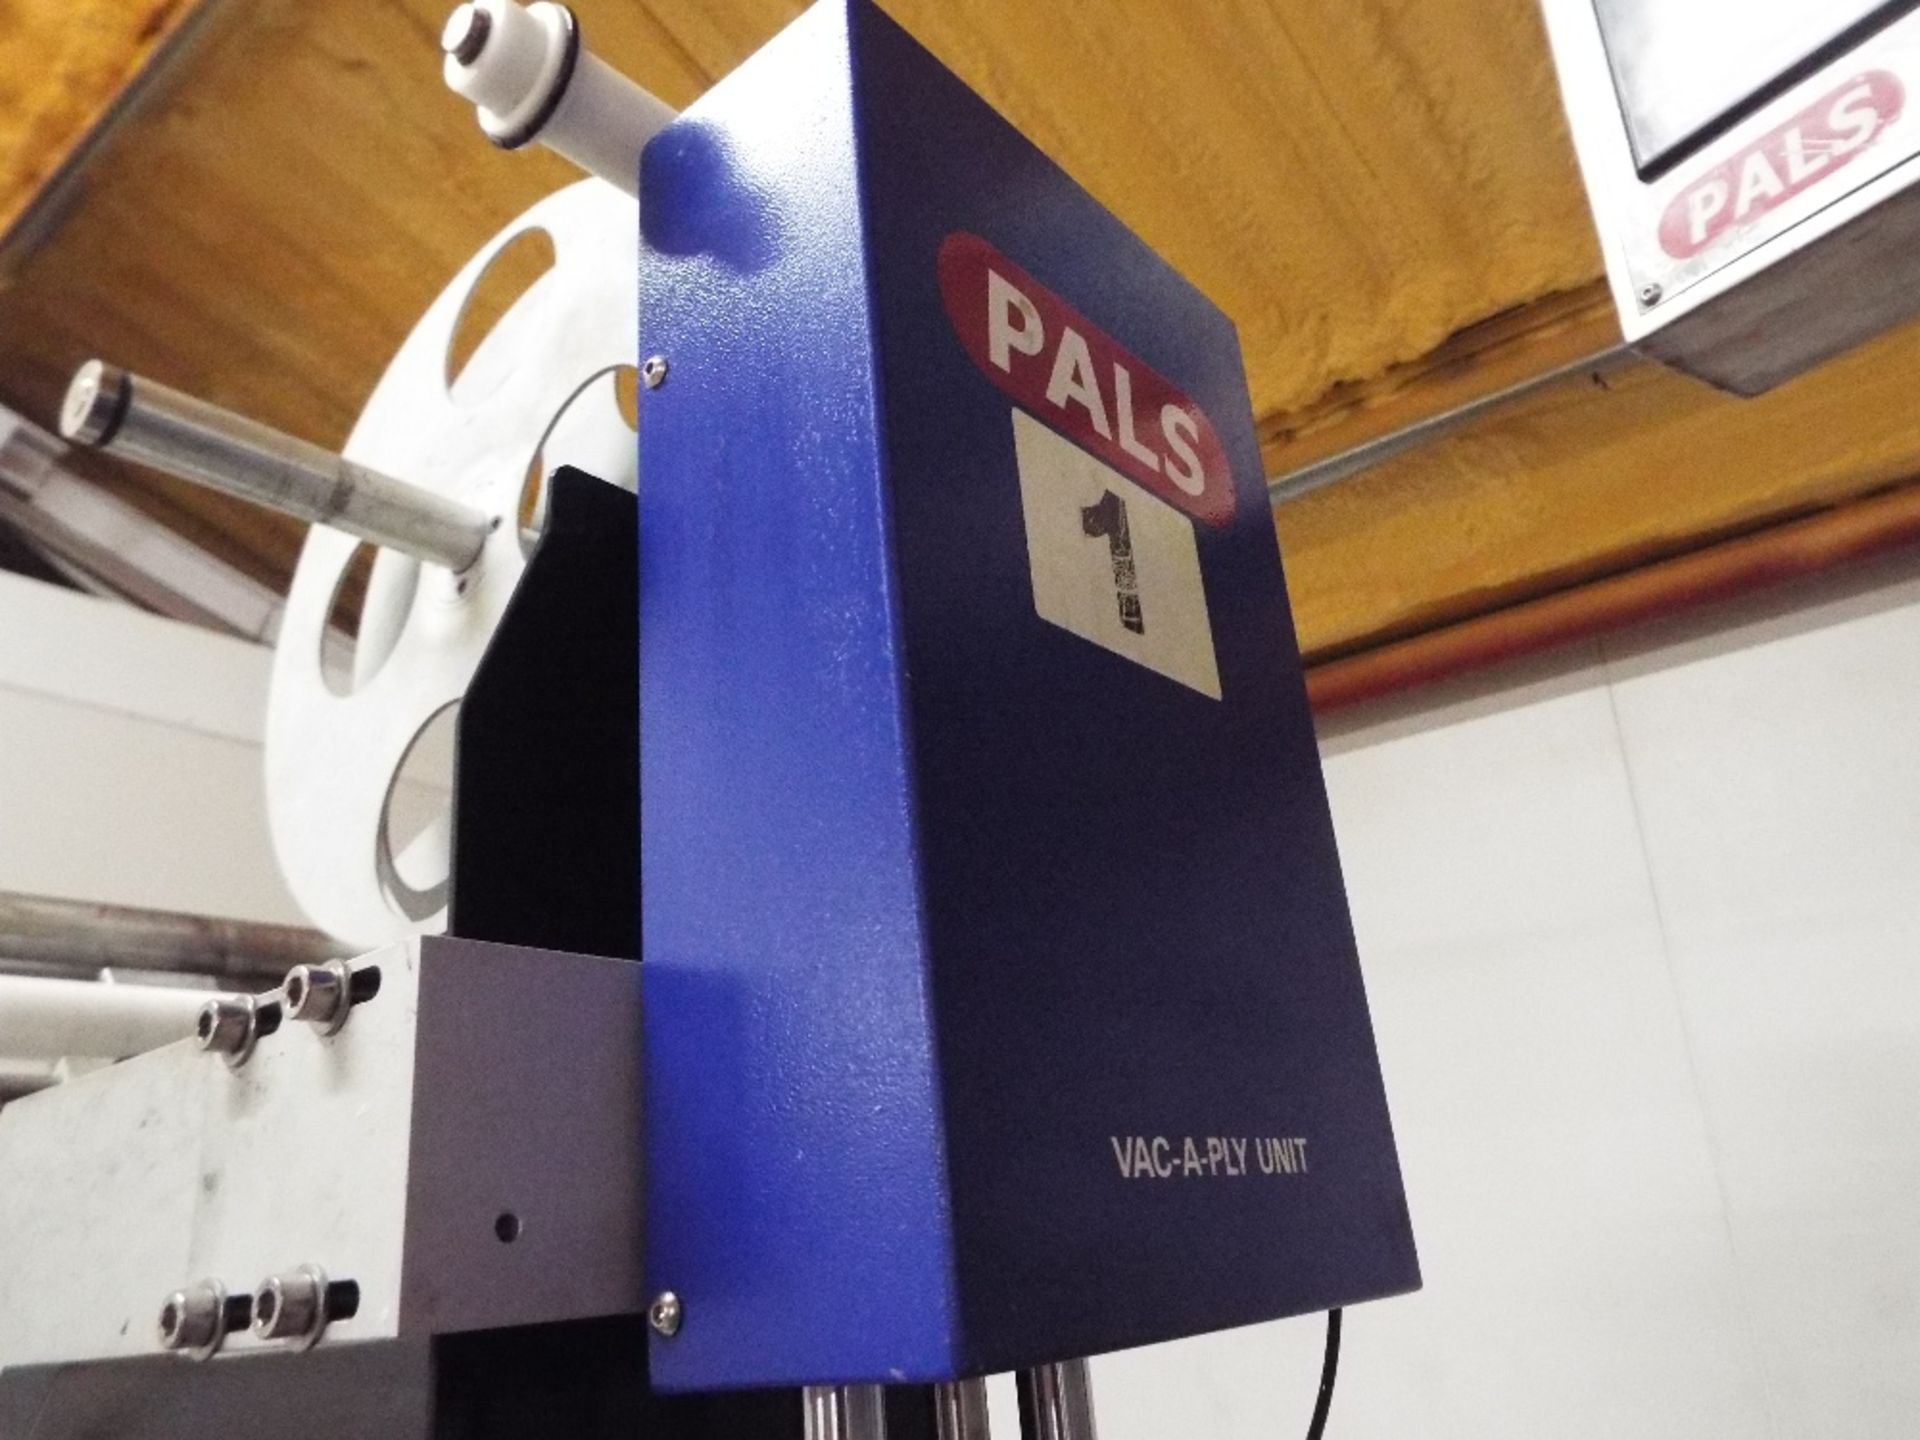 Pals Labelling Machine - Image 5 of 9